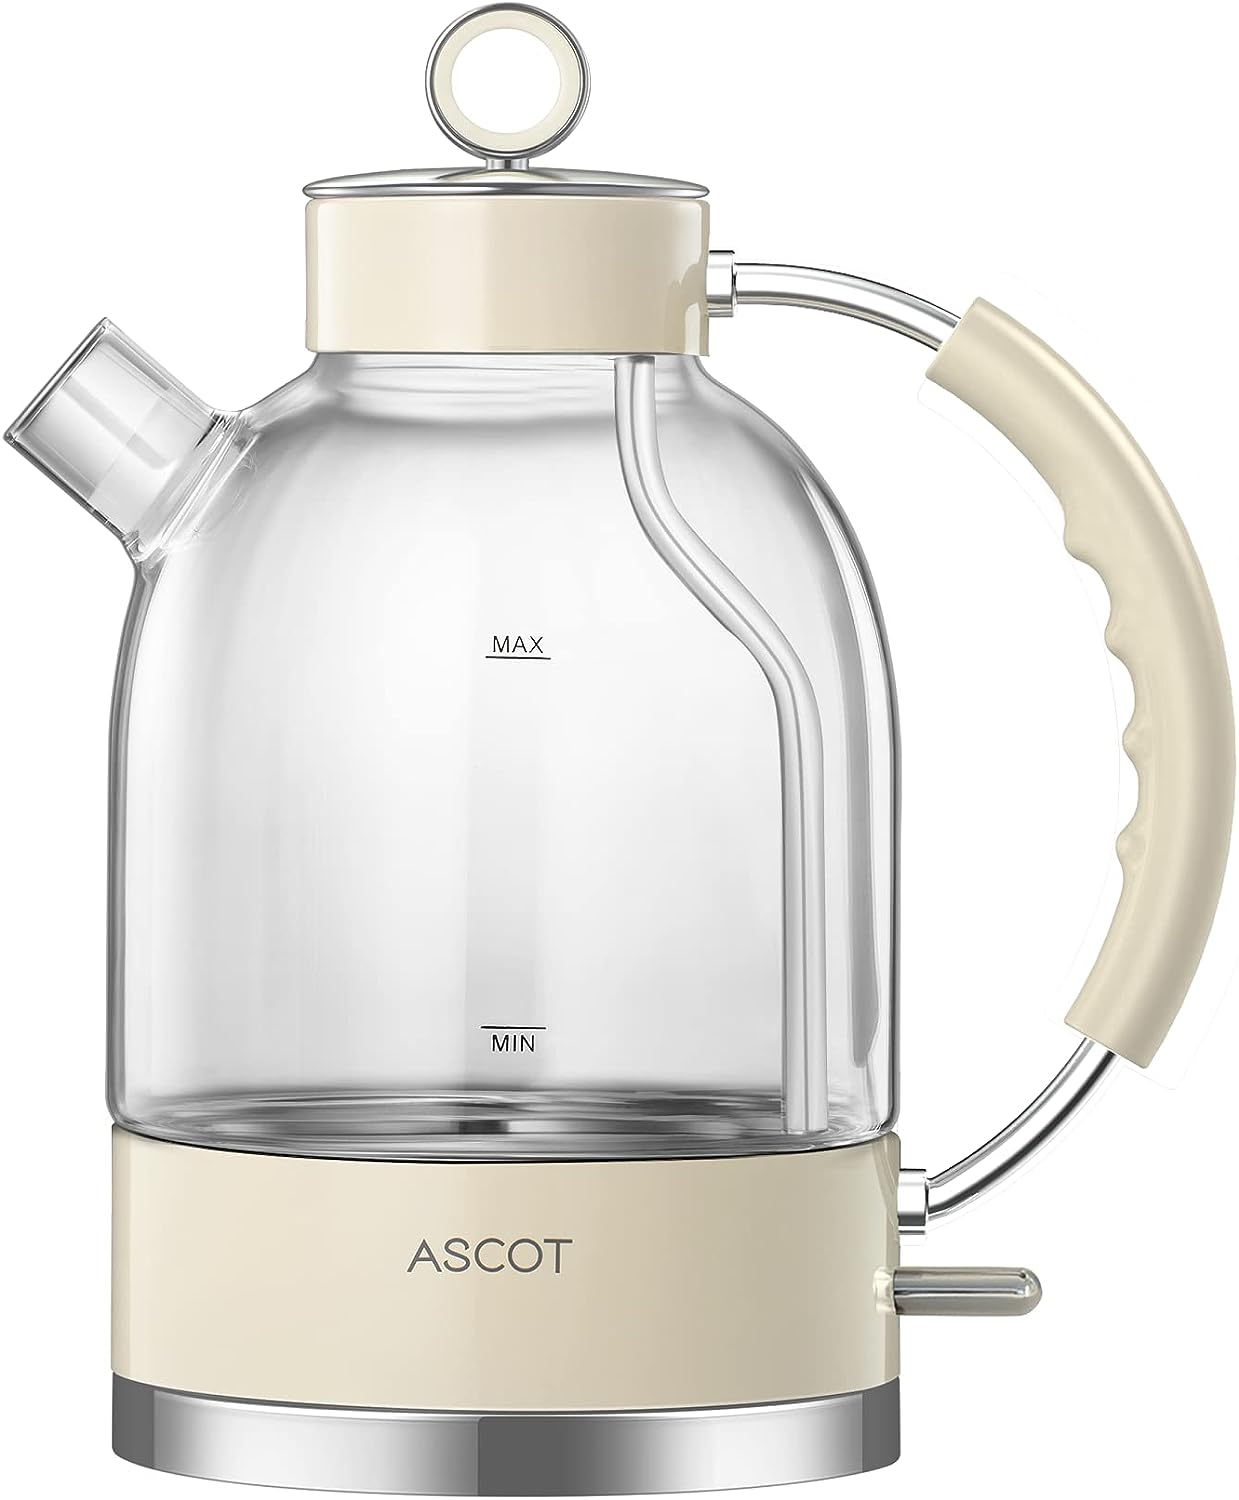 1.5L Ceramic Electric Water Kettle High Power Electric Kettle With Safety  Automatic power-off Function Quick Boiling Tea